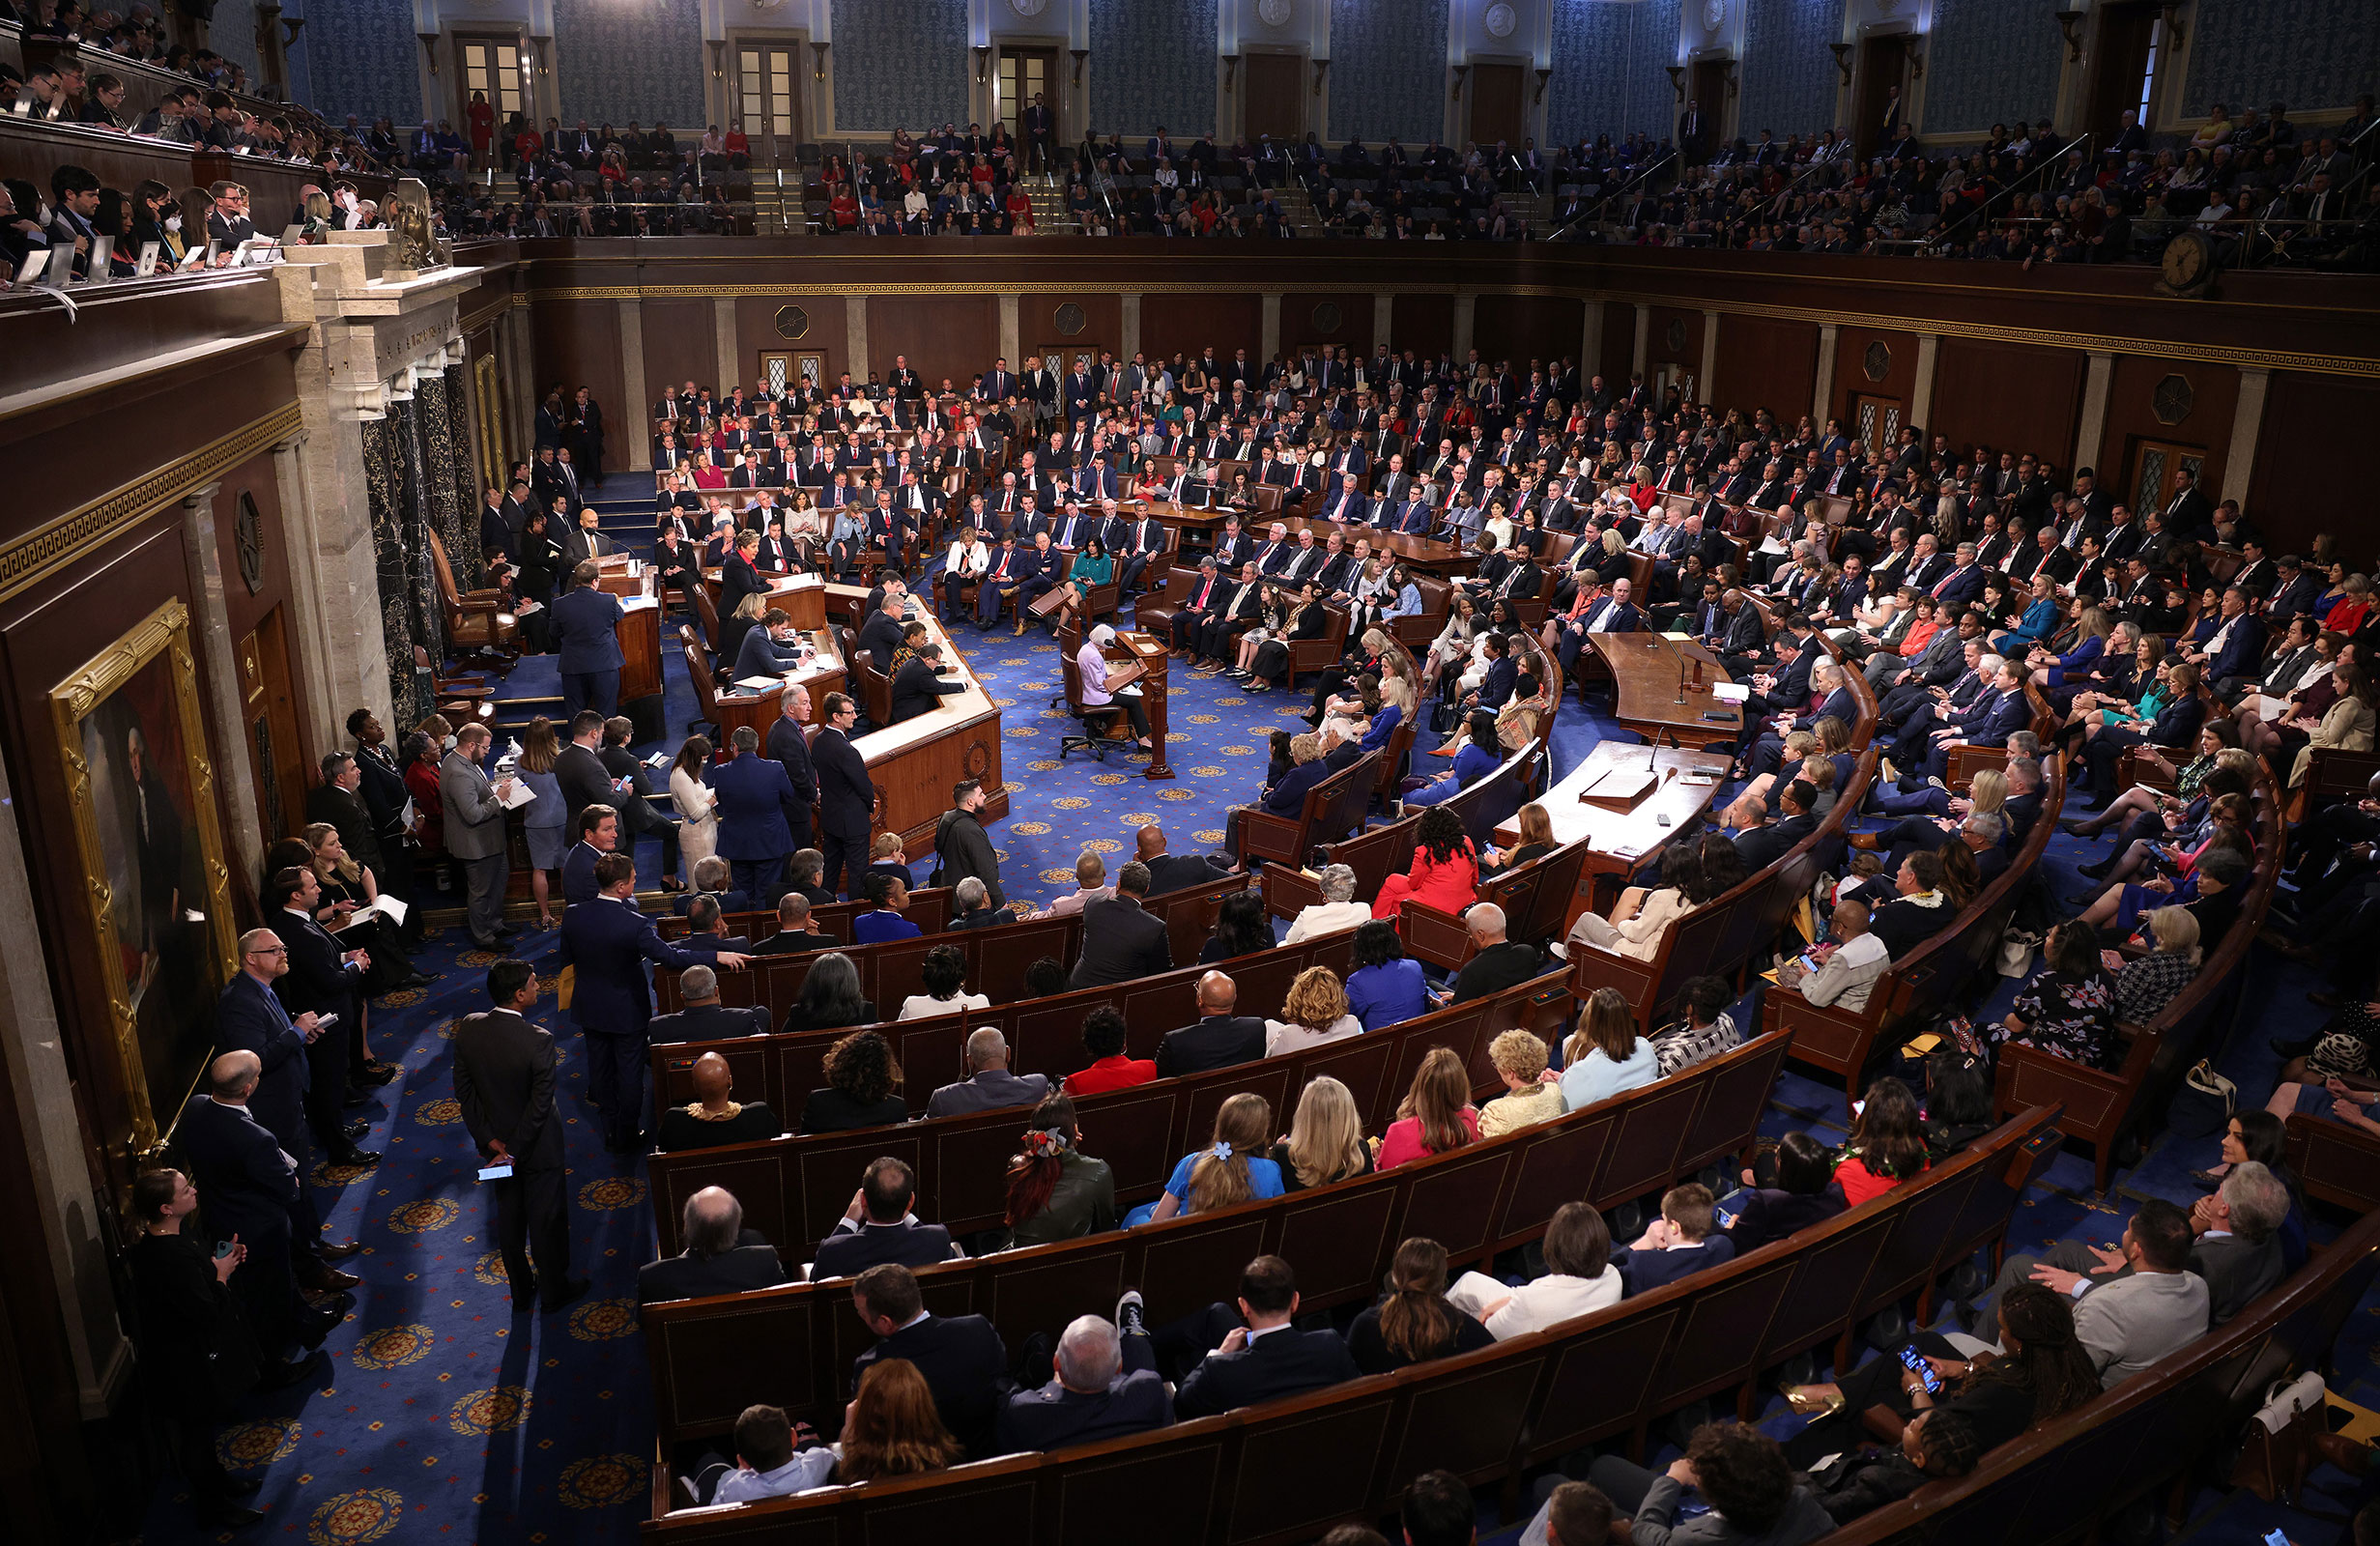 Members of the House of Representatives participate in the vote for Speaker on the first day of the 118th Congress on January 3.